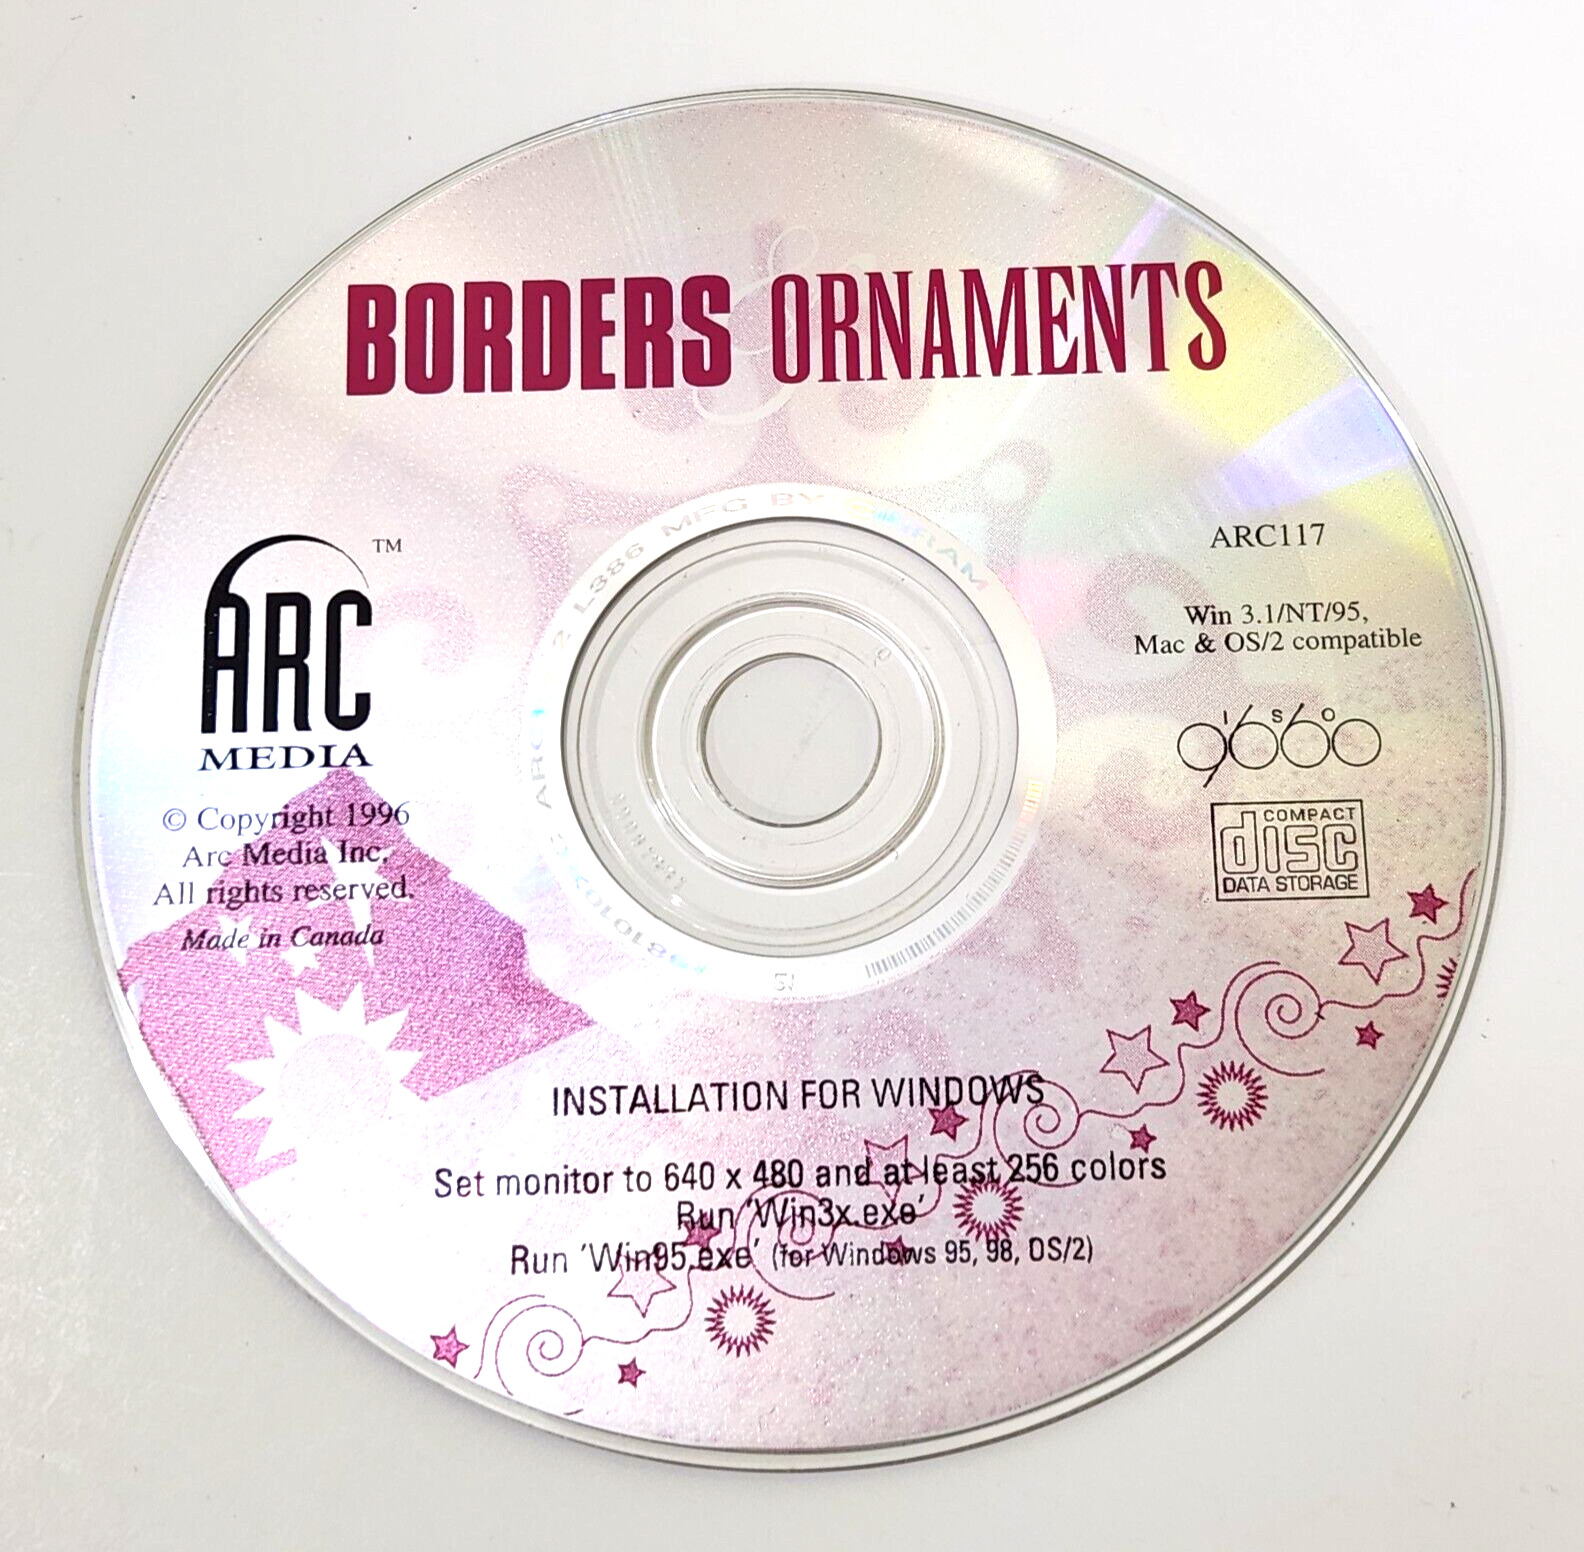 Vintage BORDERS ORNAMENTS Software For Windows 3.1 NT 95 Mac OS/2 ARC117 90s